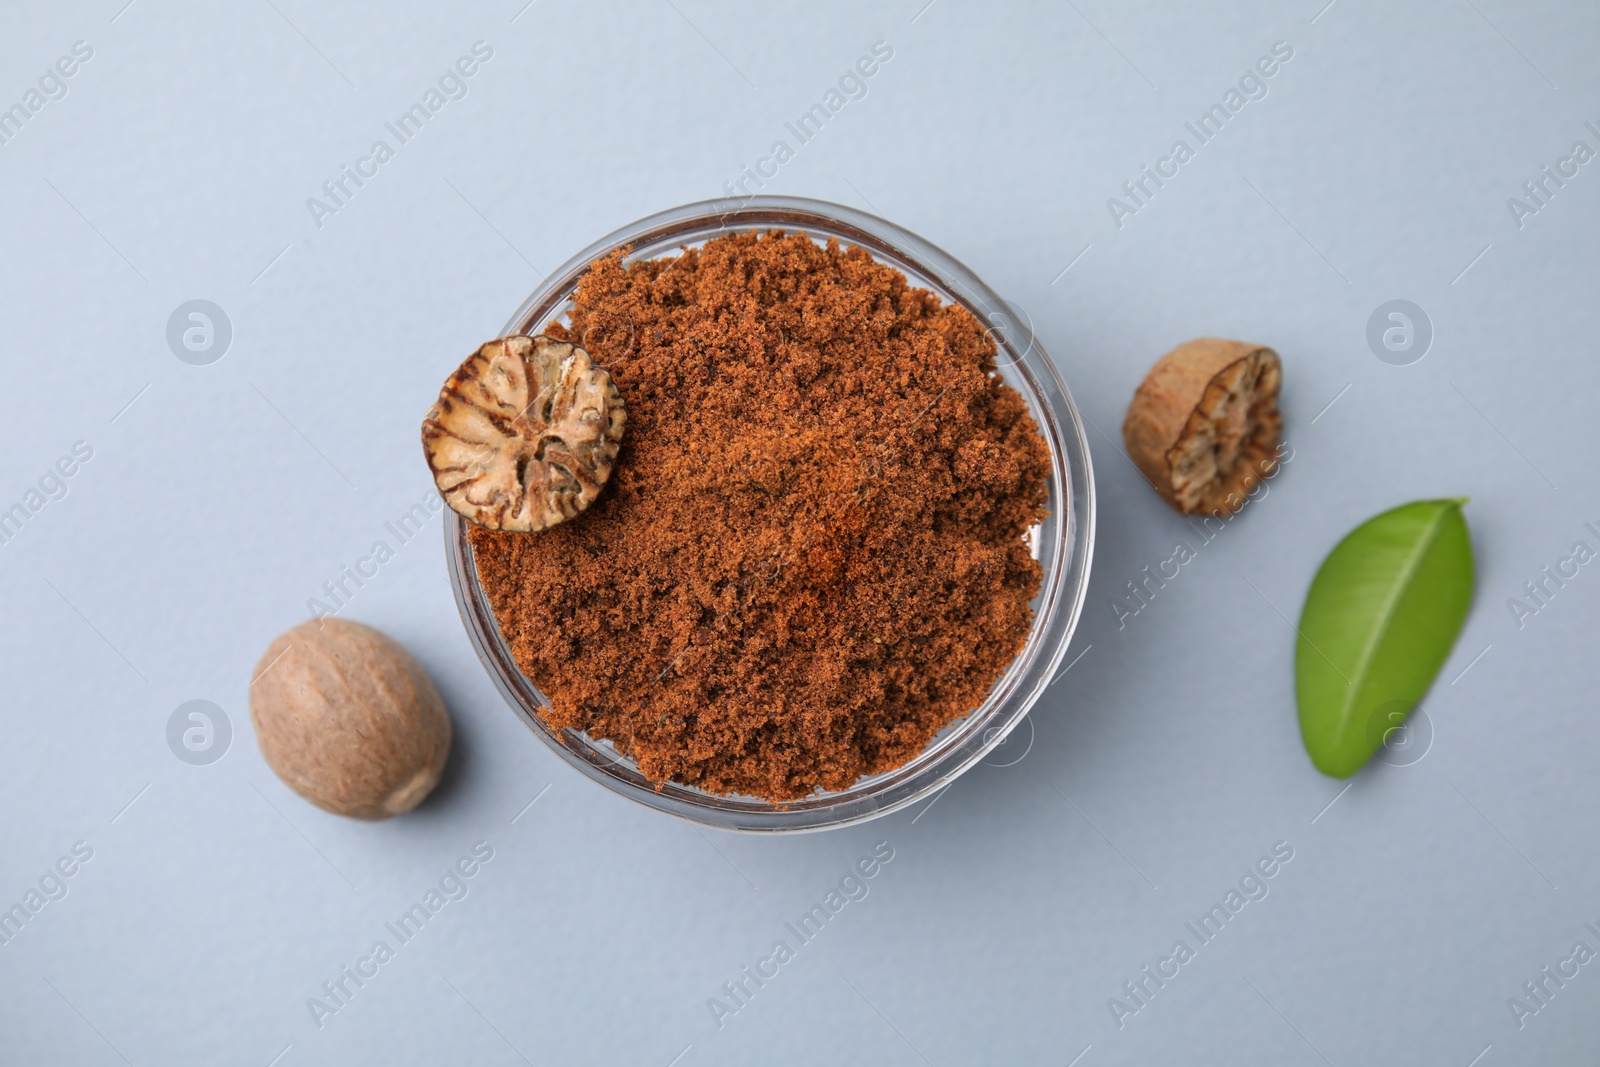 Photo of Nutmeg powder in bowl, seeds and green leaf on white background, flat lay